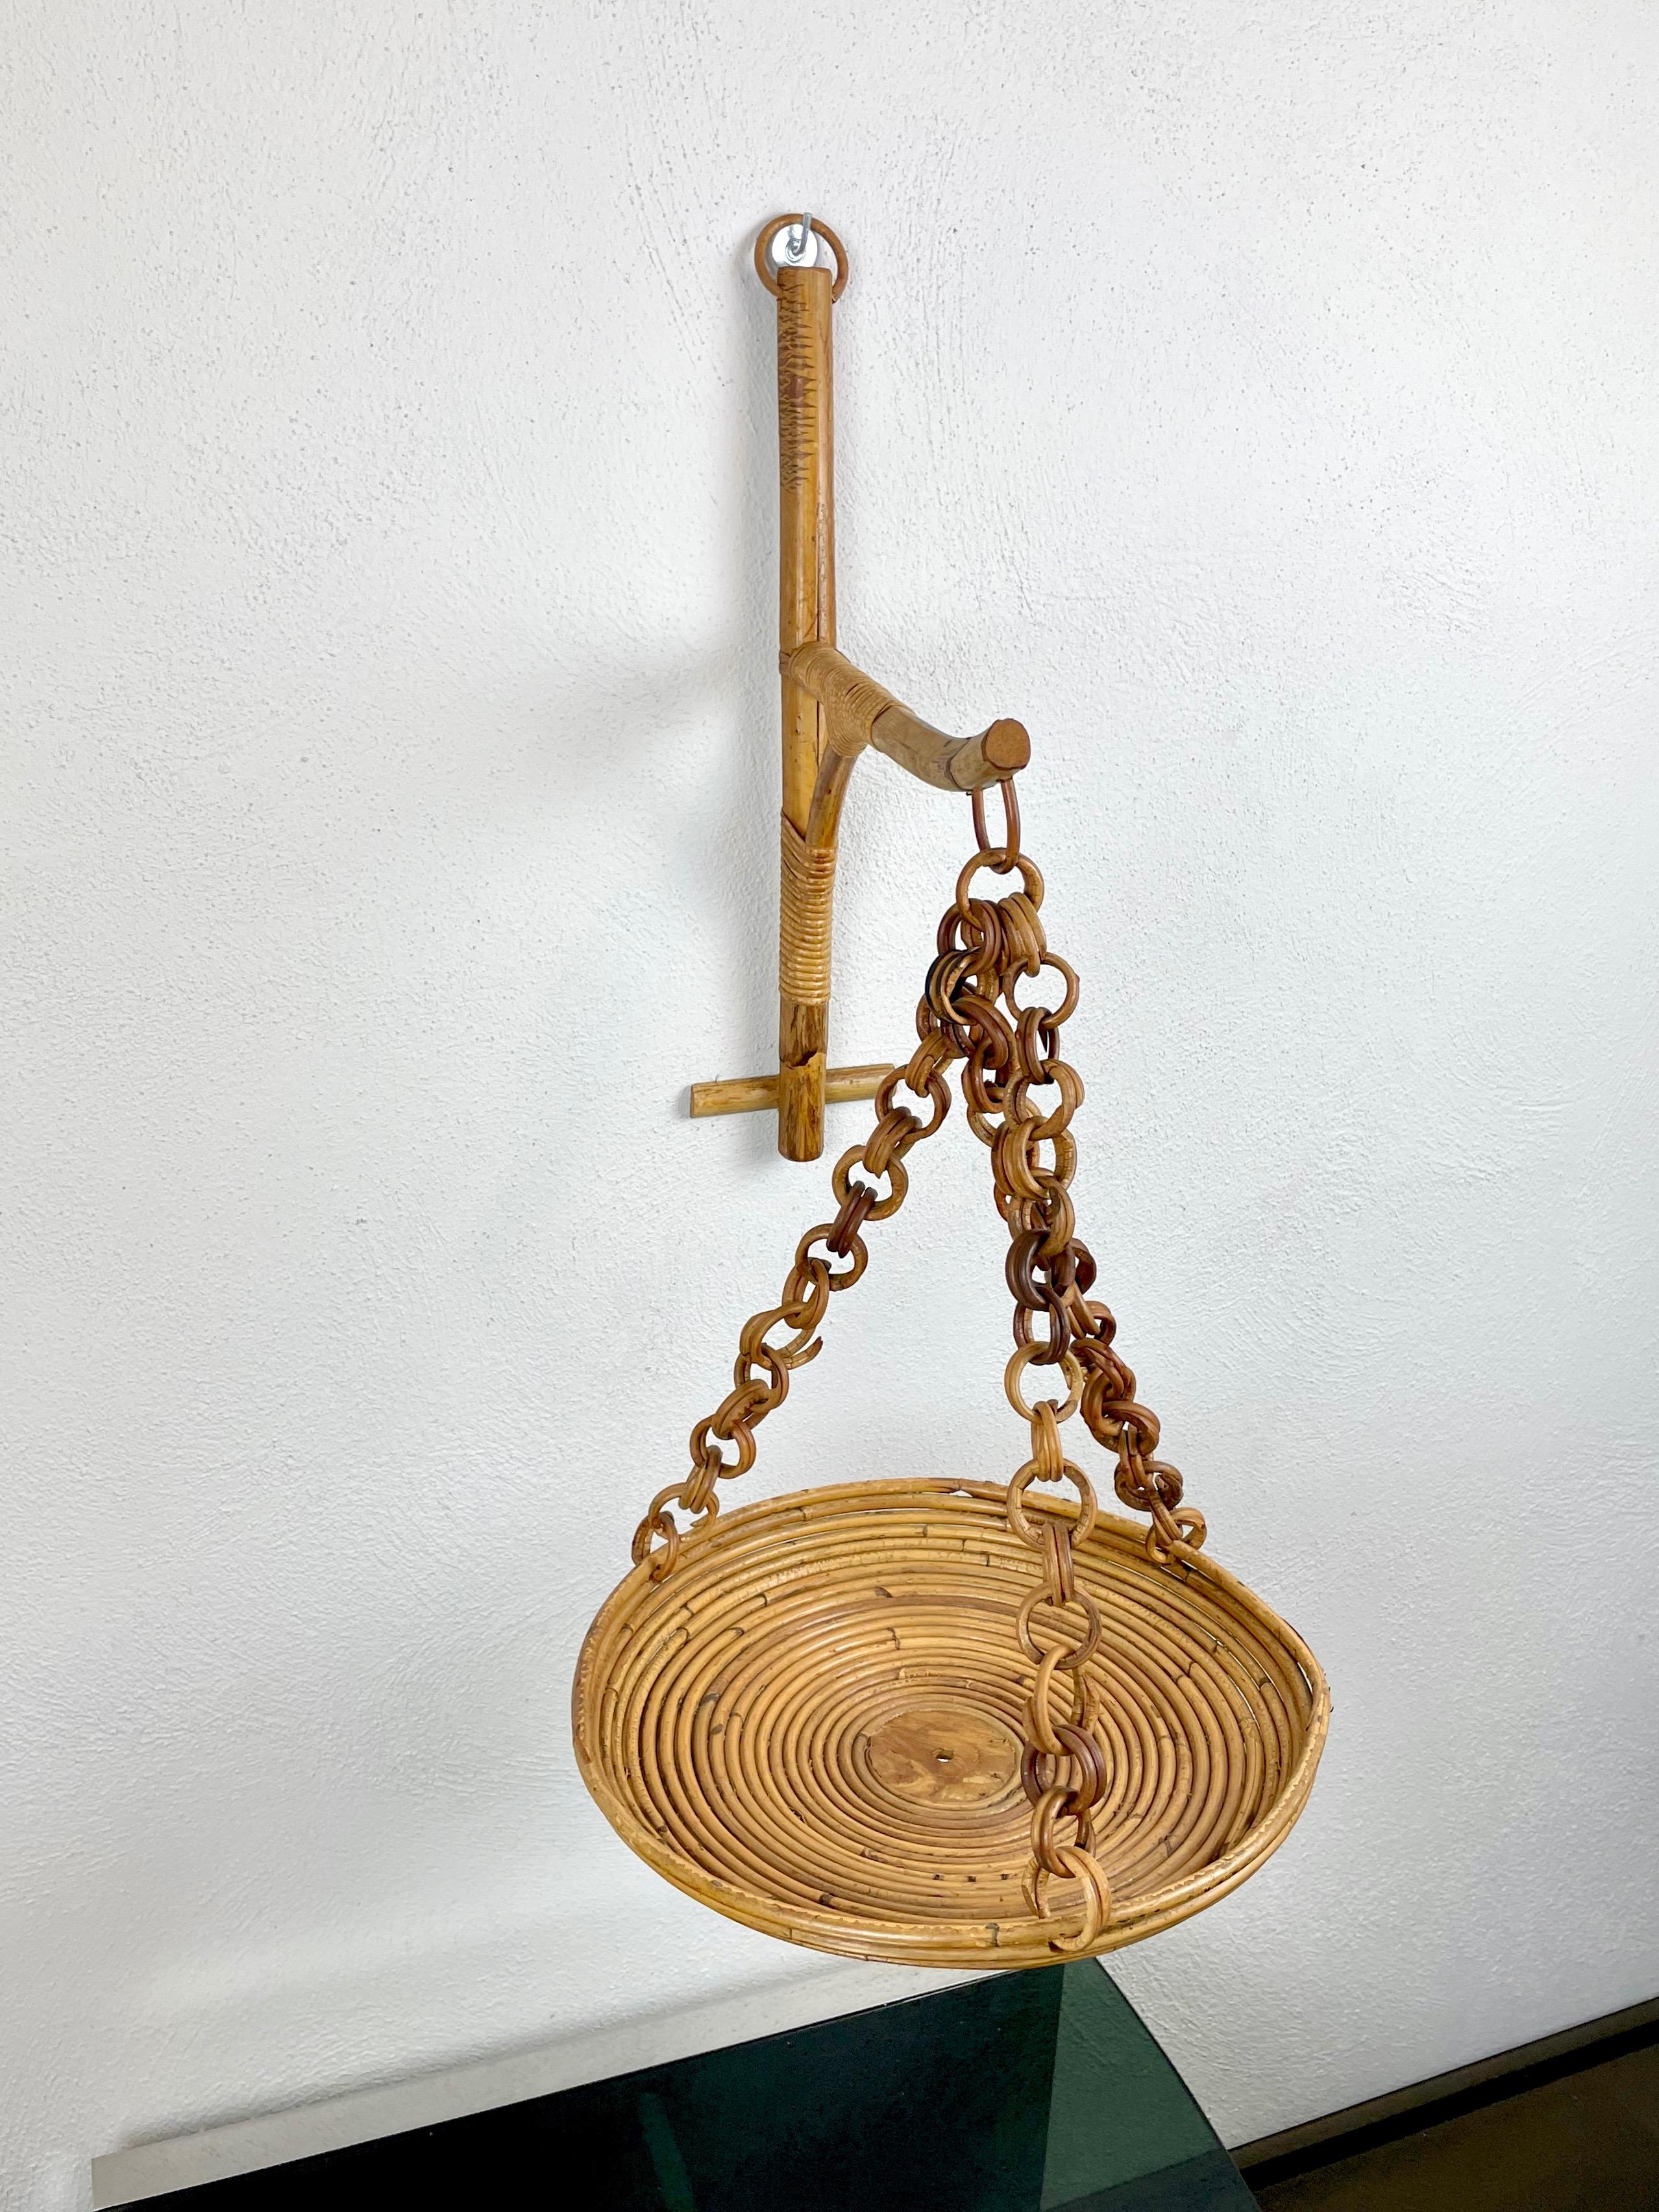 Rattan & Bamboo Wall Stand Flower Plant Holder, Italy, 1960s For Sale 5